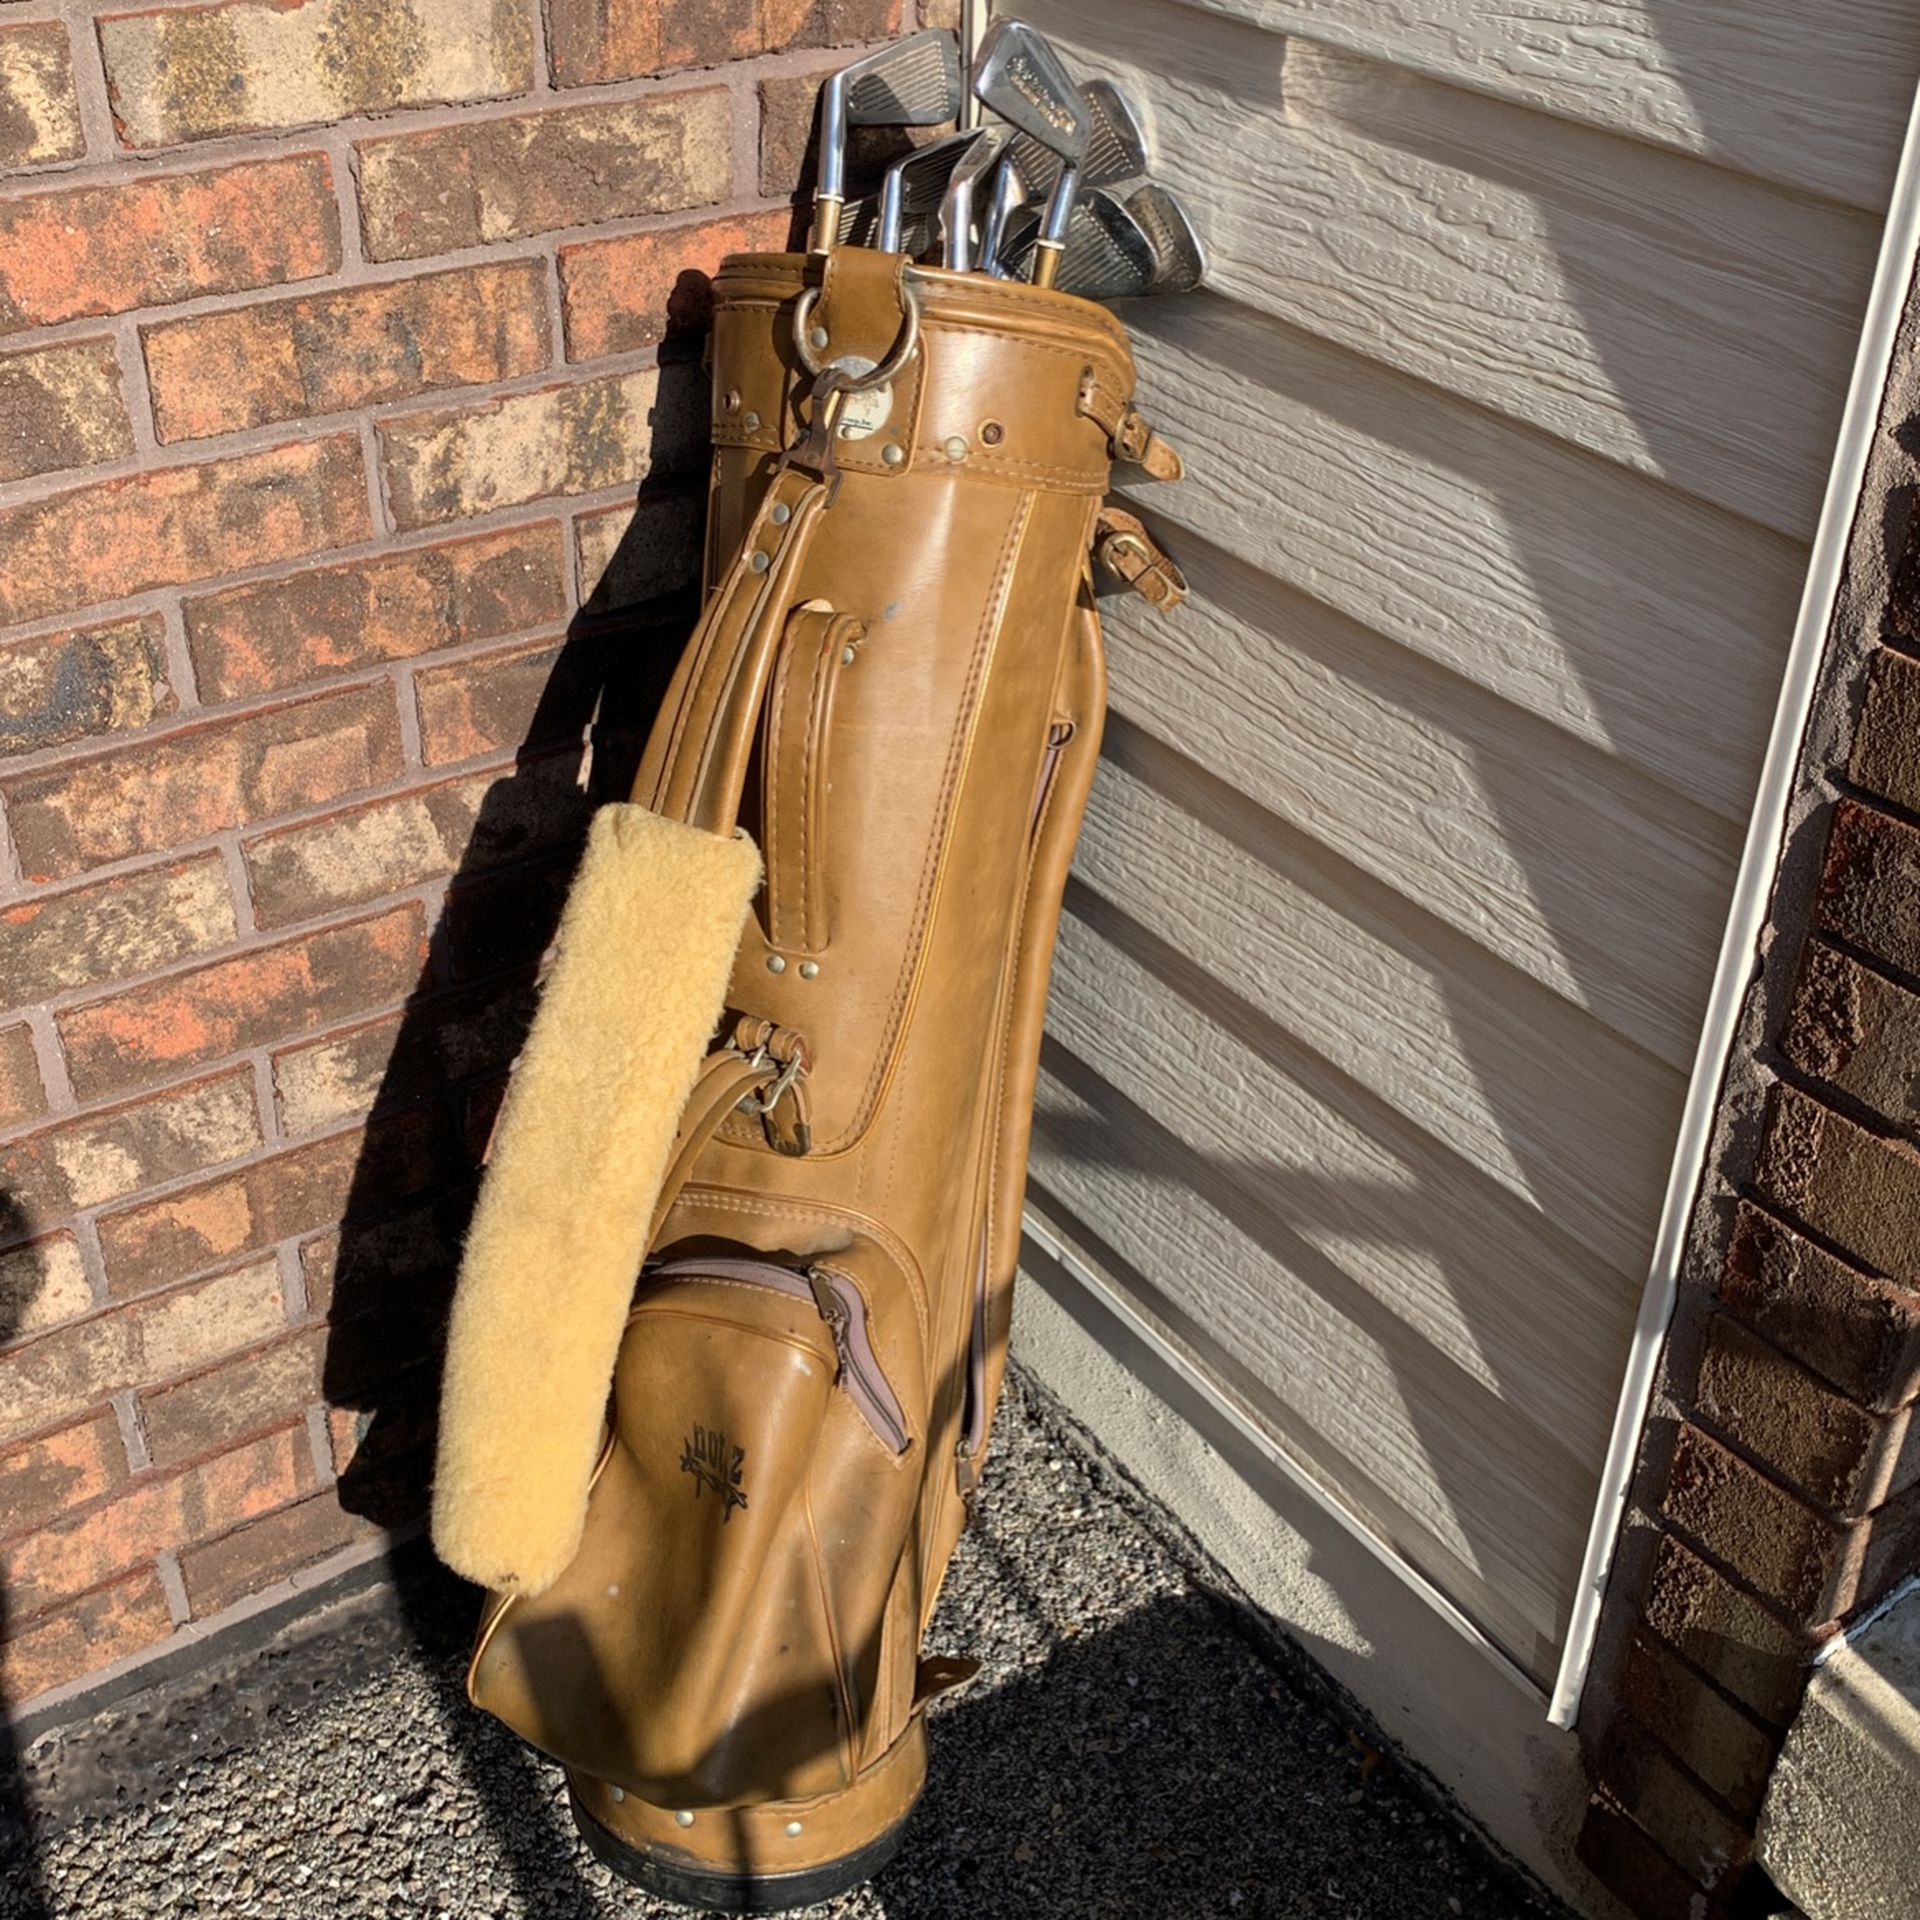 Golf Bag with Miscellaneous Clubs